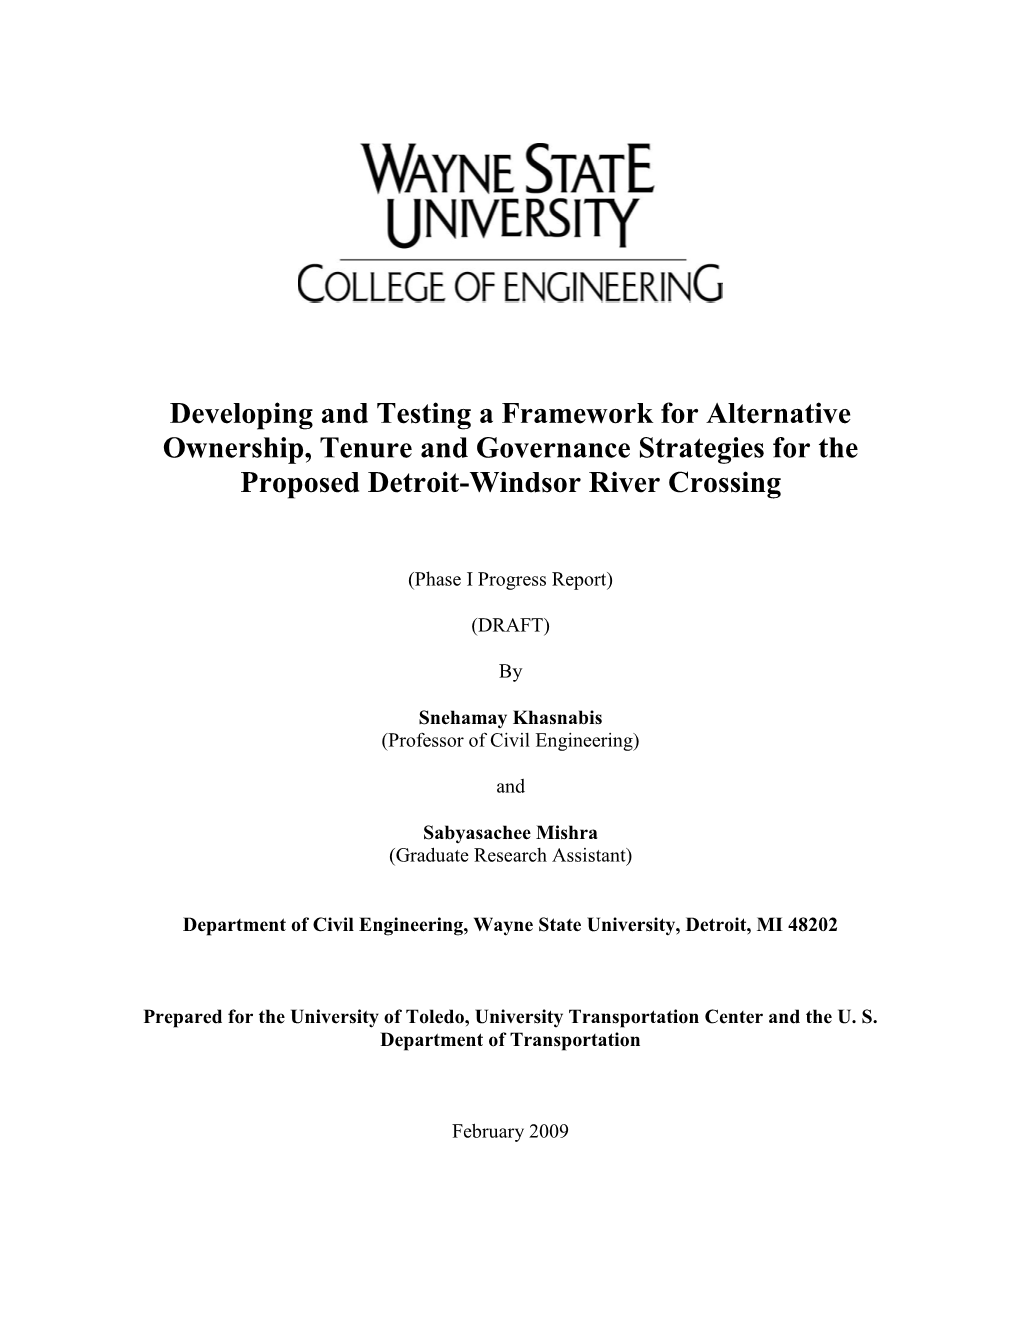 Developing and Testing a Framework for Alternative Ownership, Tenure and Governance Strategies for the Proposed Detroit-Windsor River Crossing